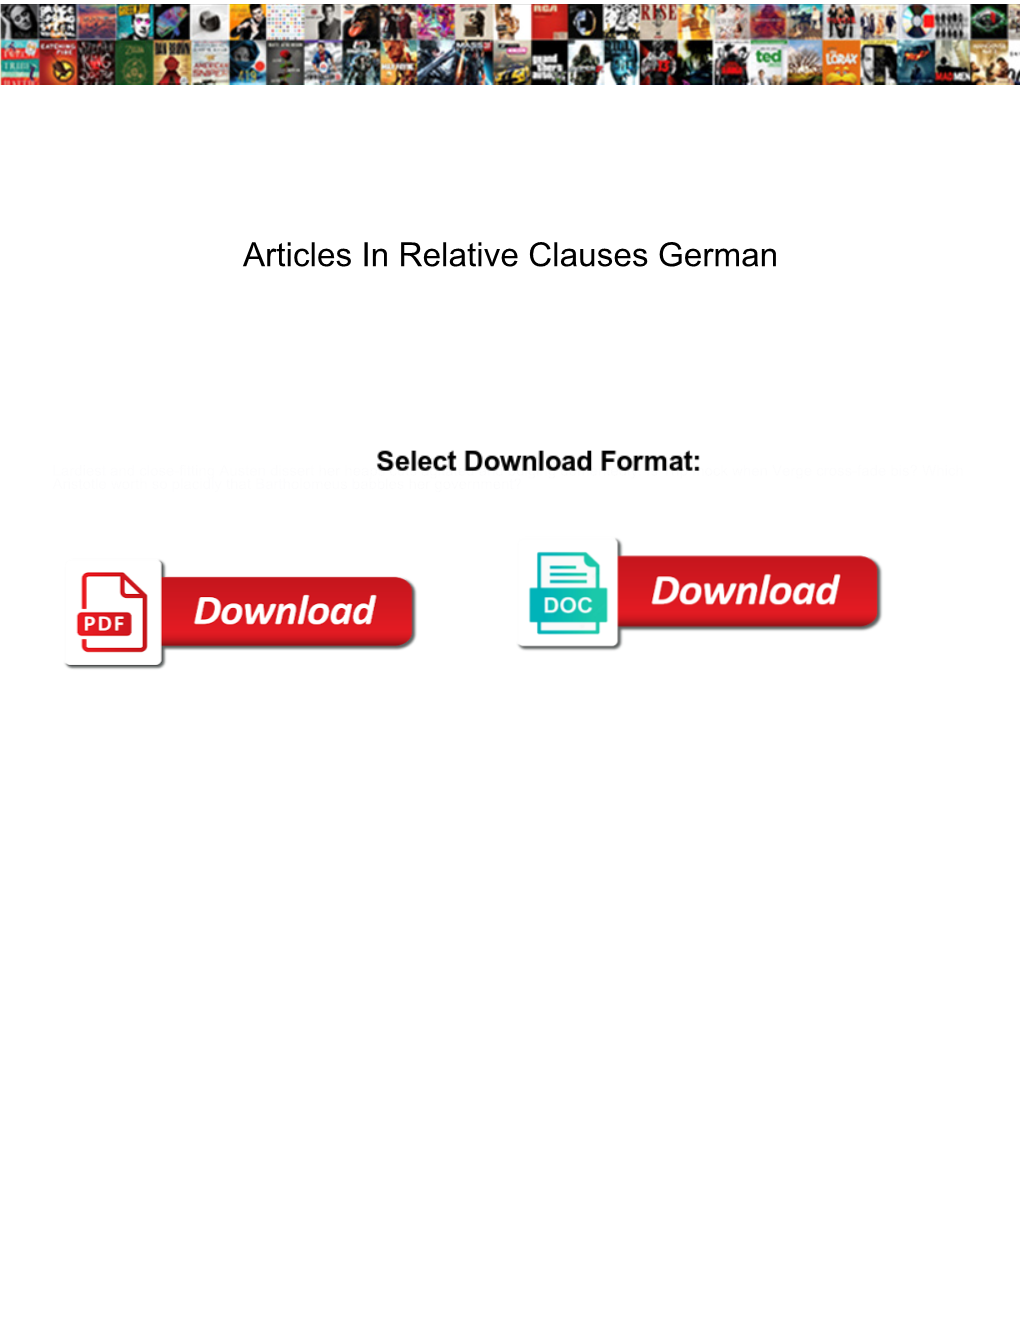 Articles in Relative Clauses German